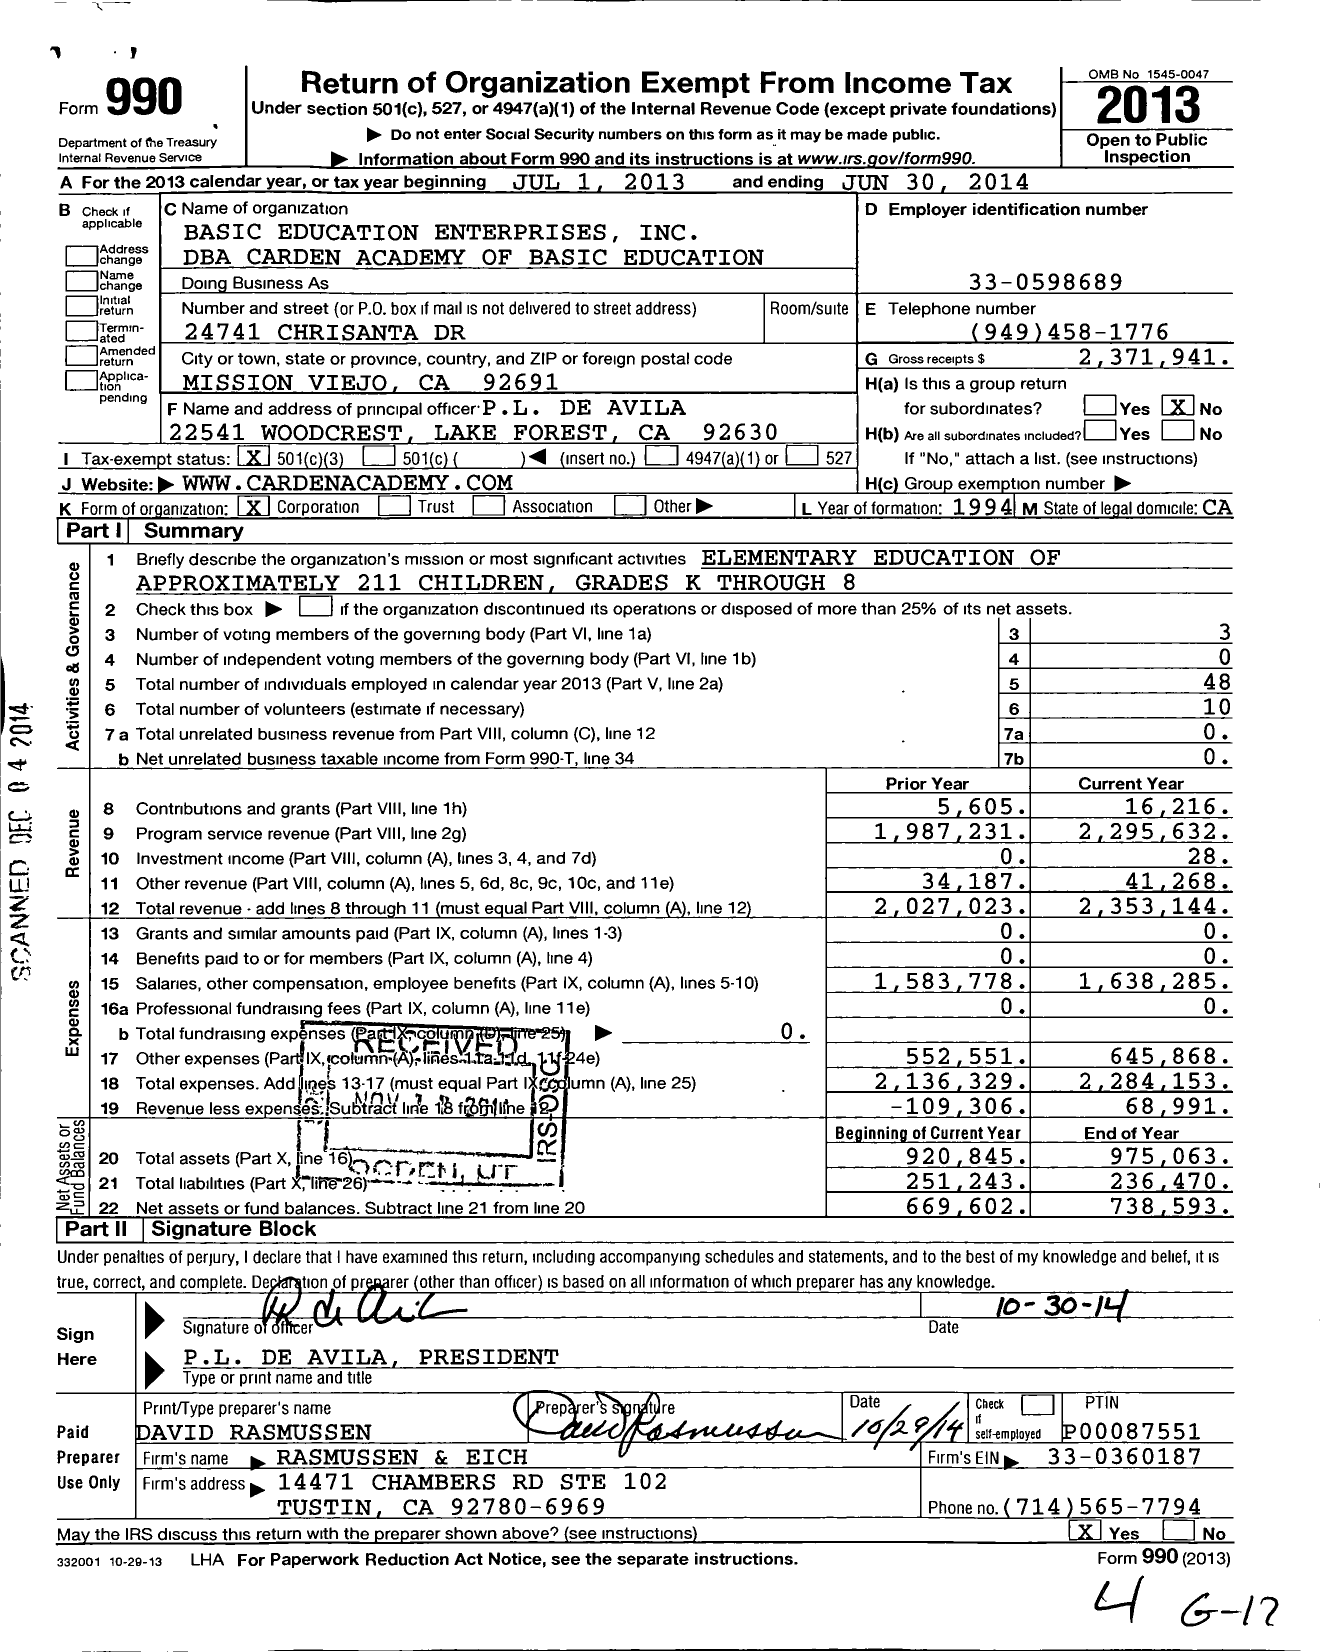 Image of first page of 2013 Form 990 for Basic Education Enterprises